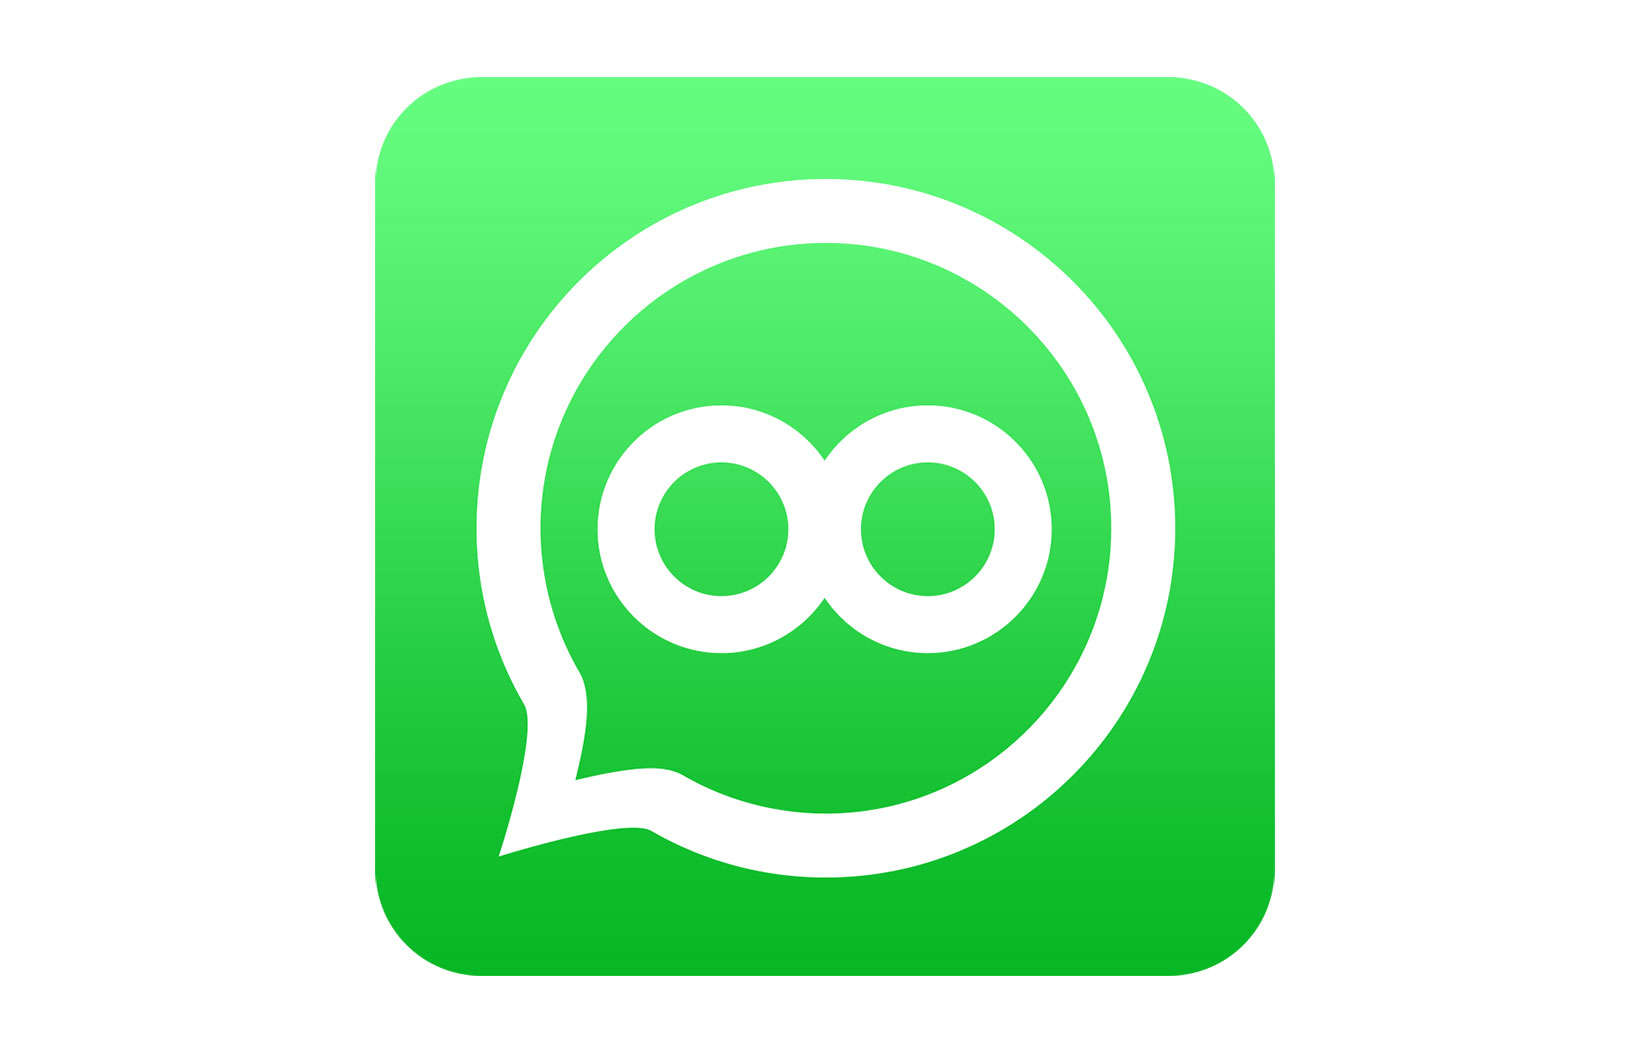 SOMA Messenger is gaining popularity around the world for free and secure communication.